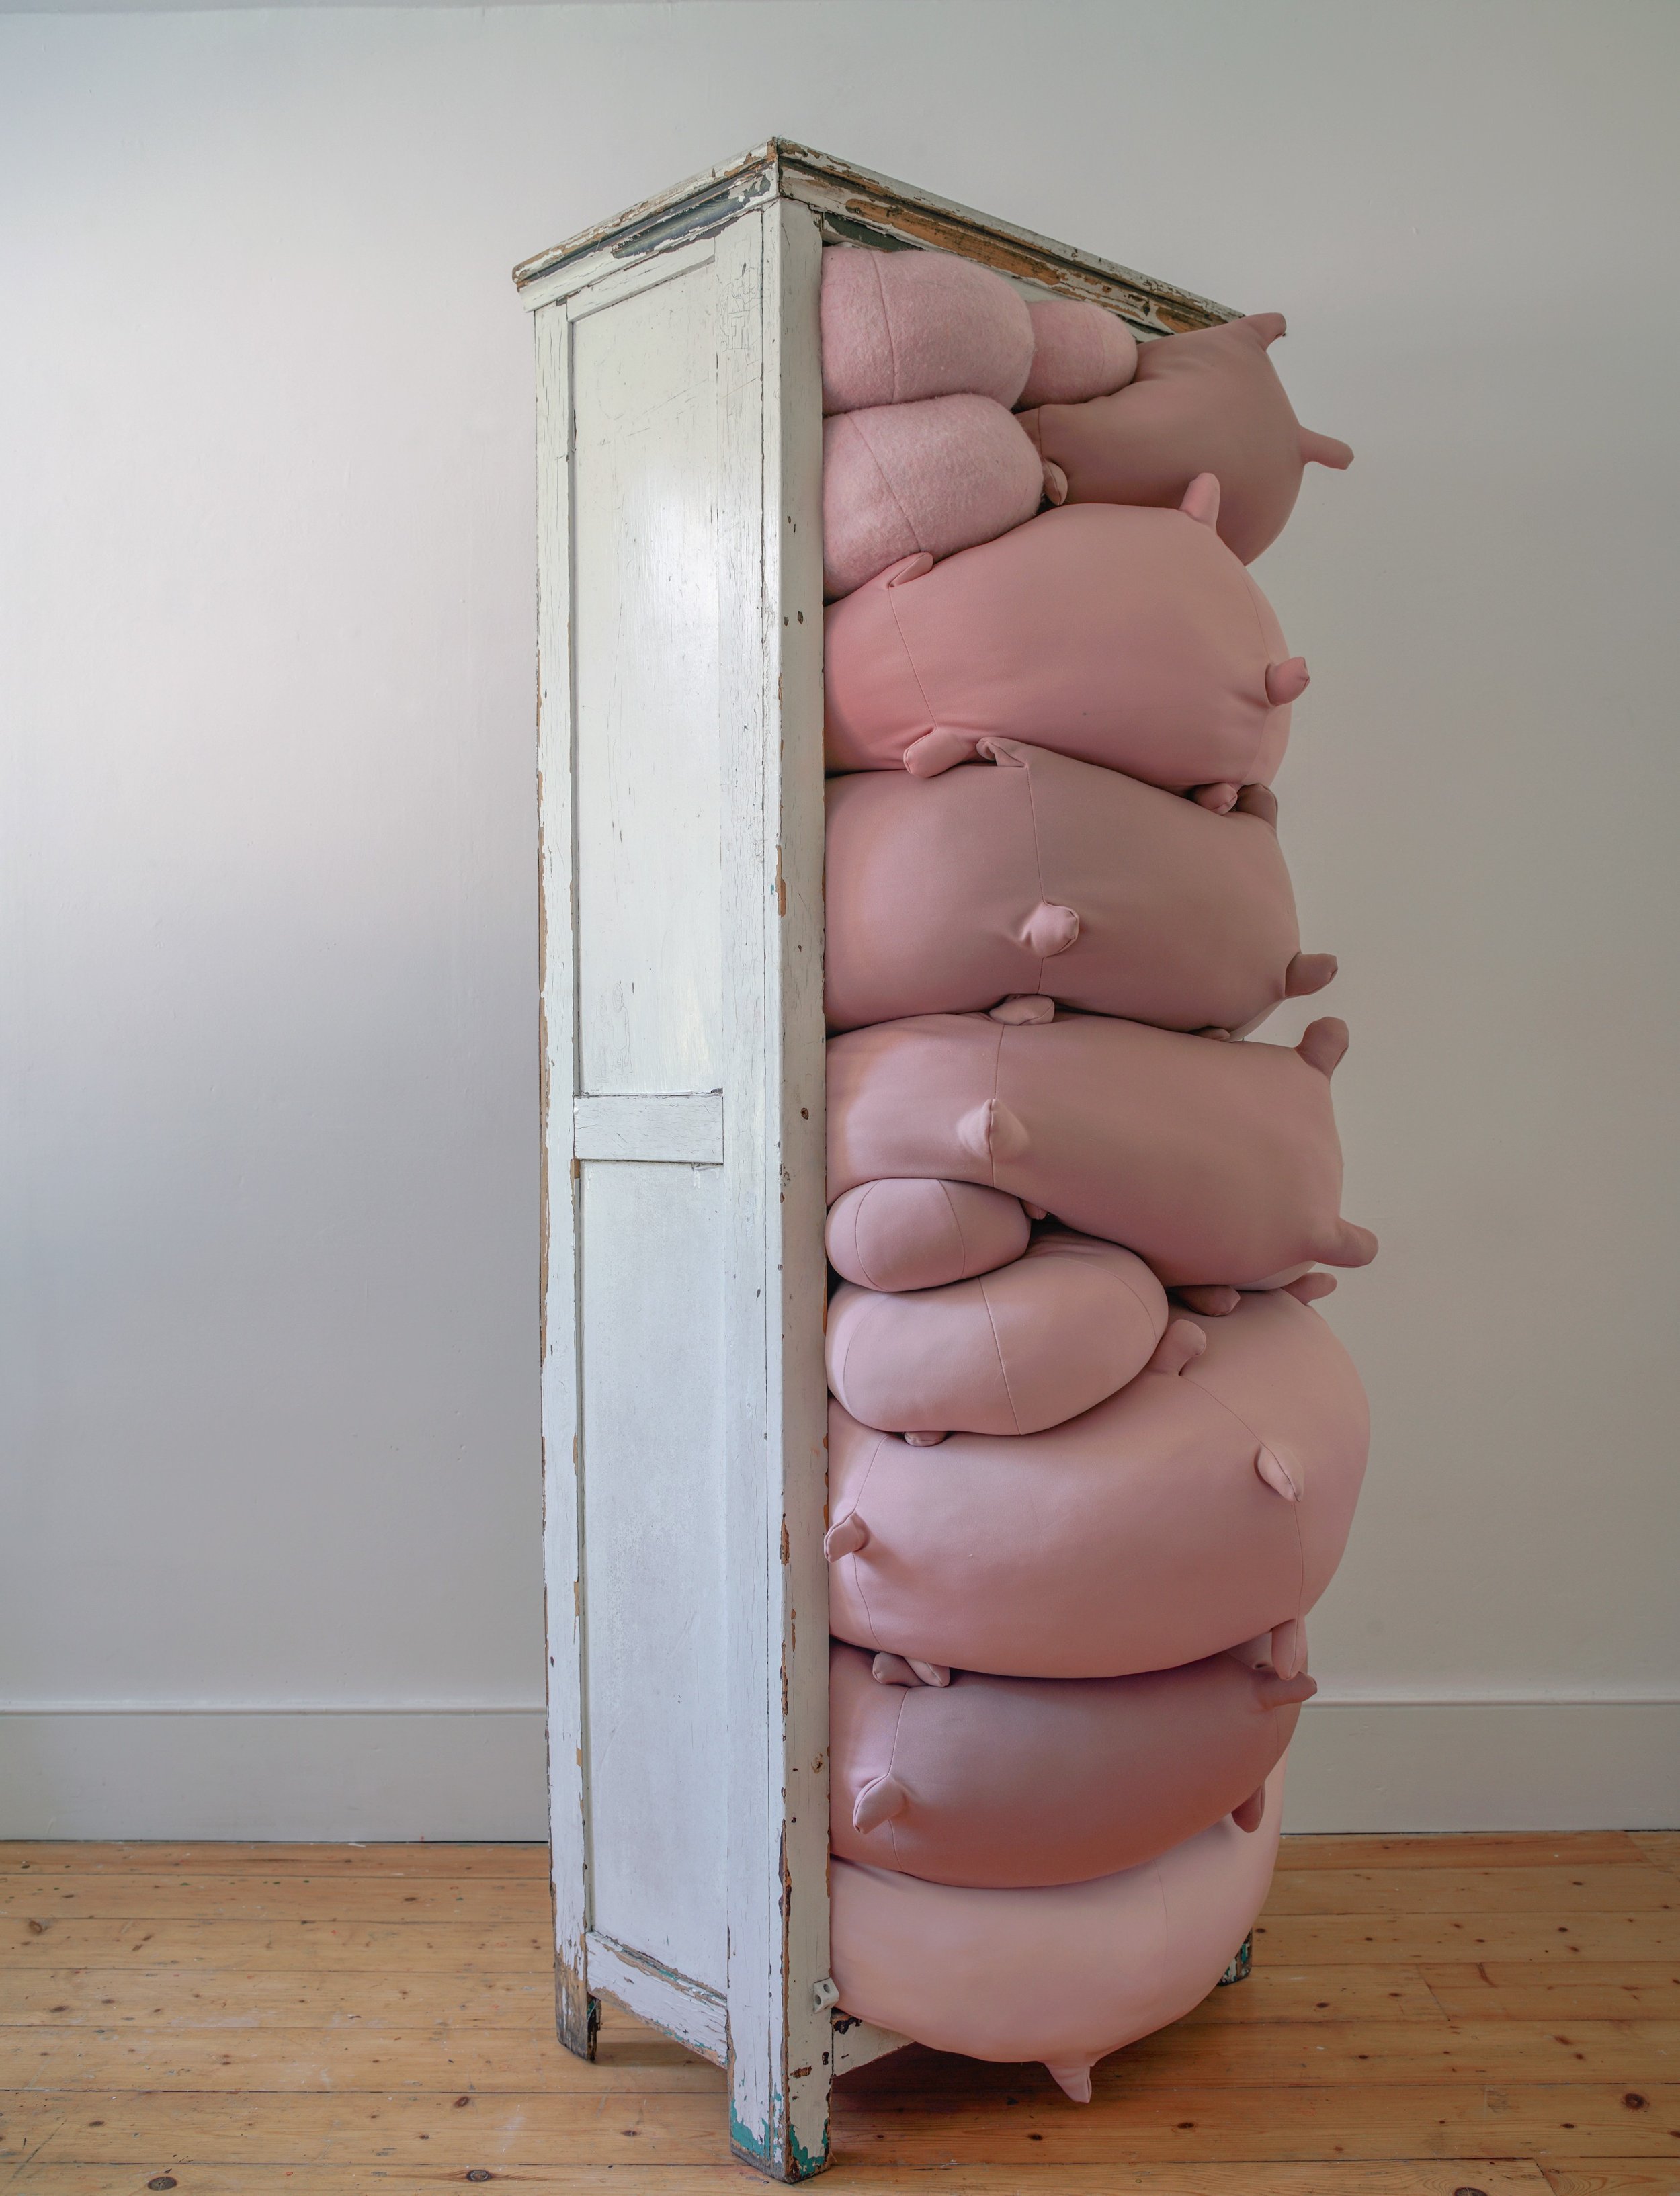  Just one more little squeeze please Louise, 2022     Installation of found wooden cupboard, scuba, boiled wool, fleece, recycled fibrefill, repurposed fabric and foam scrap, graphite and carbon paper transfer,  approximately 178 x 67 x 50cm 